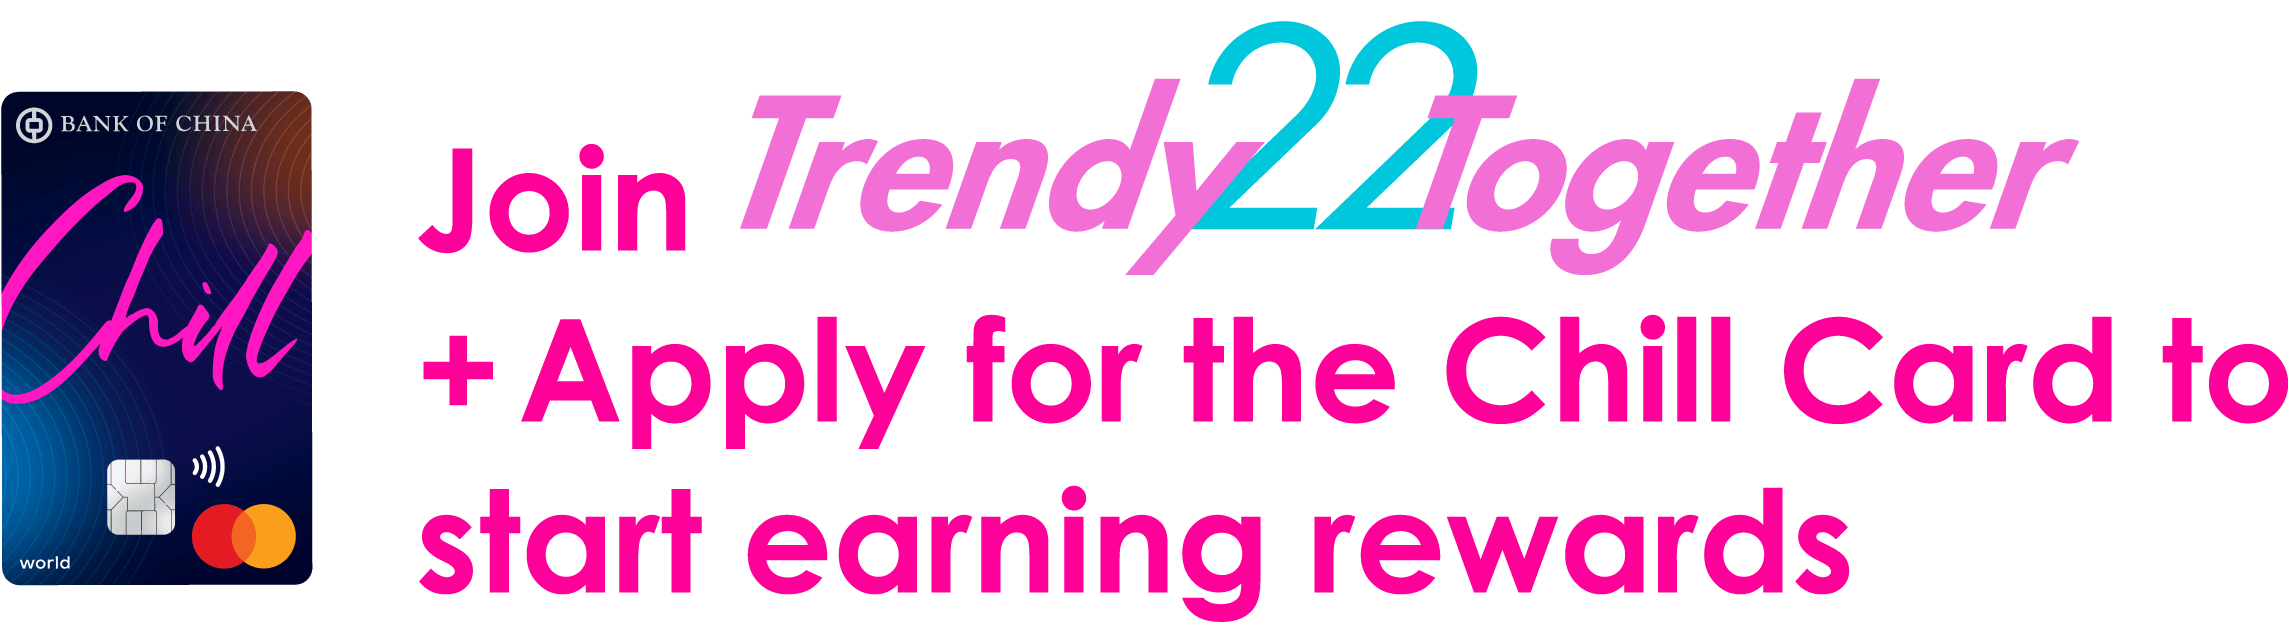 Join TrendyTogether + Apply for the Chill Card to start earning rewards